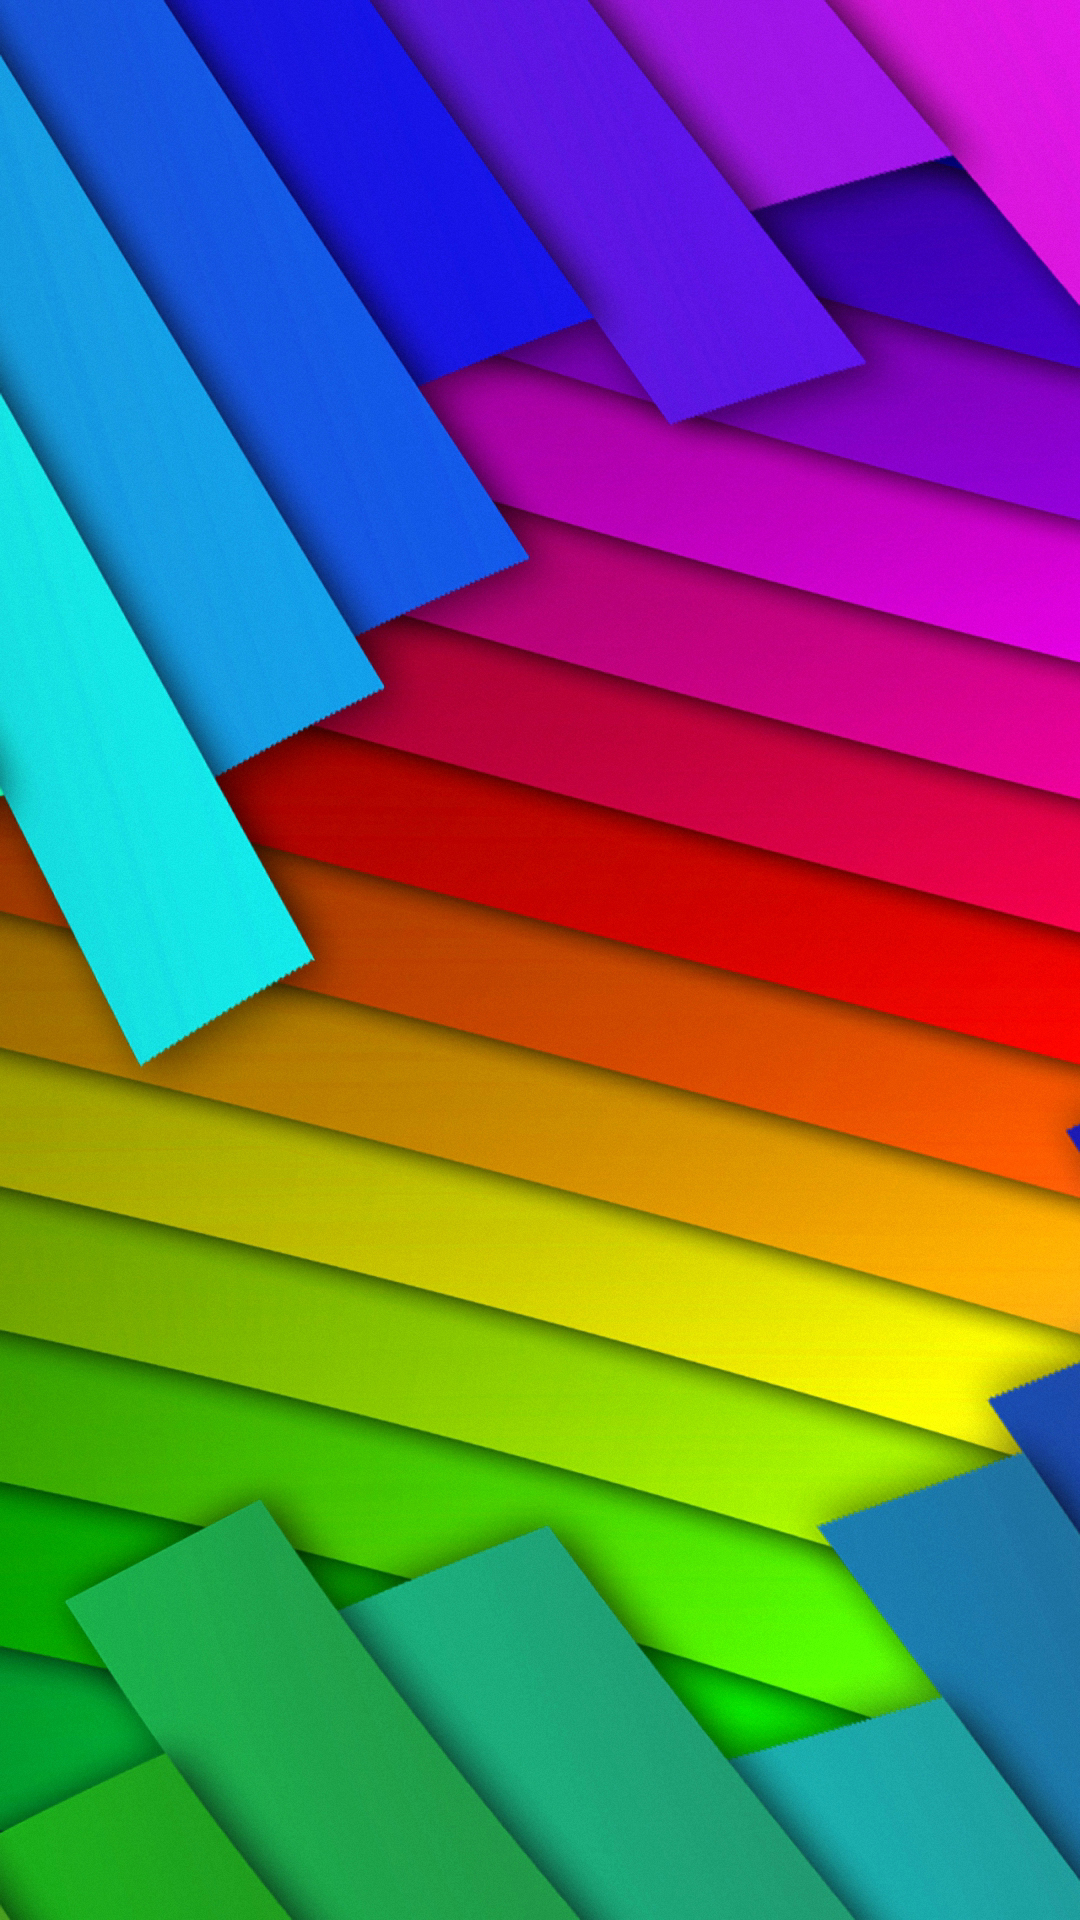 Rainbow Hd Wallpaper For Android , HD Wallpaper & Backgrounds